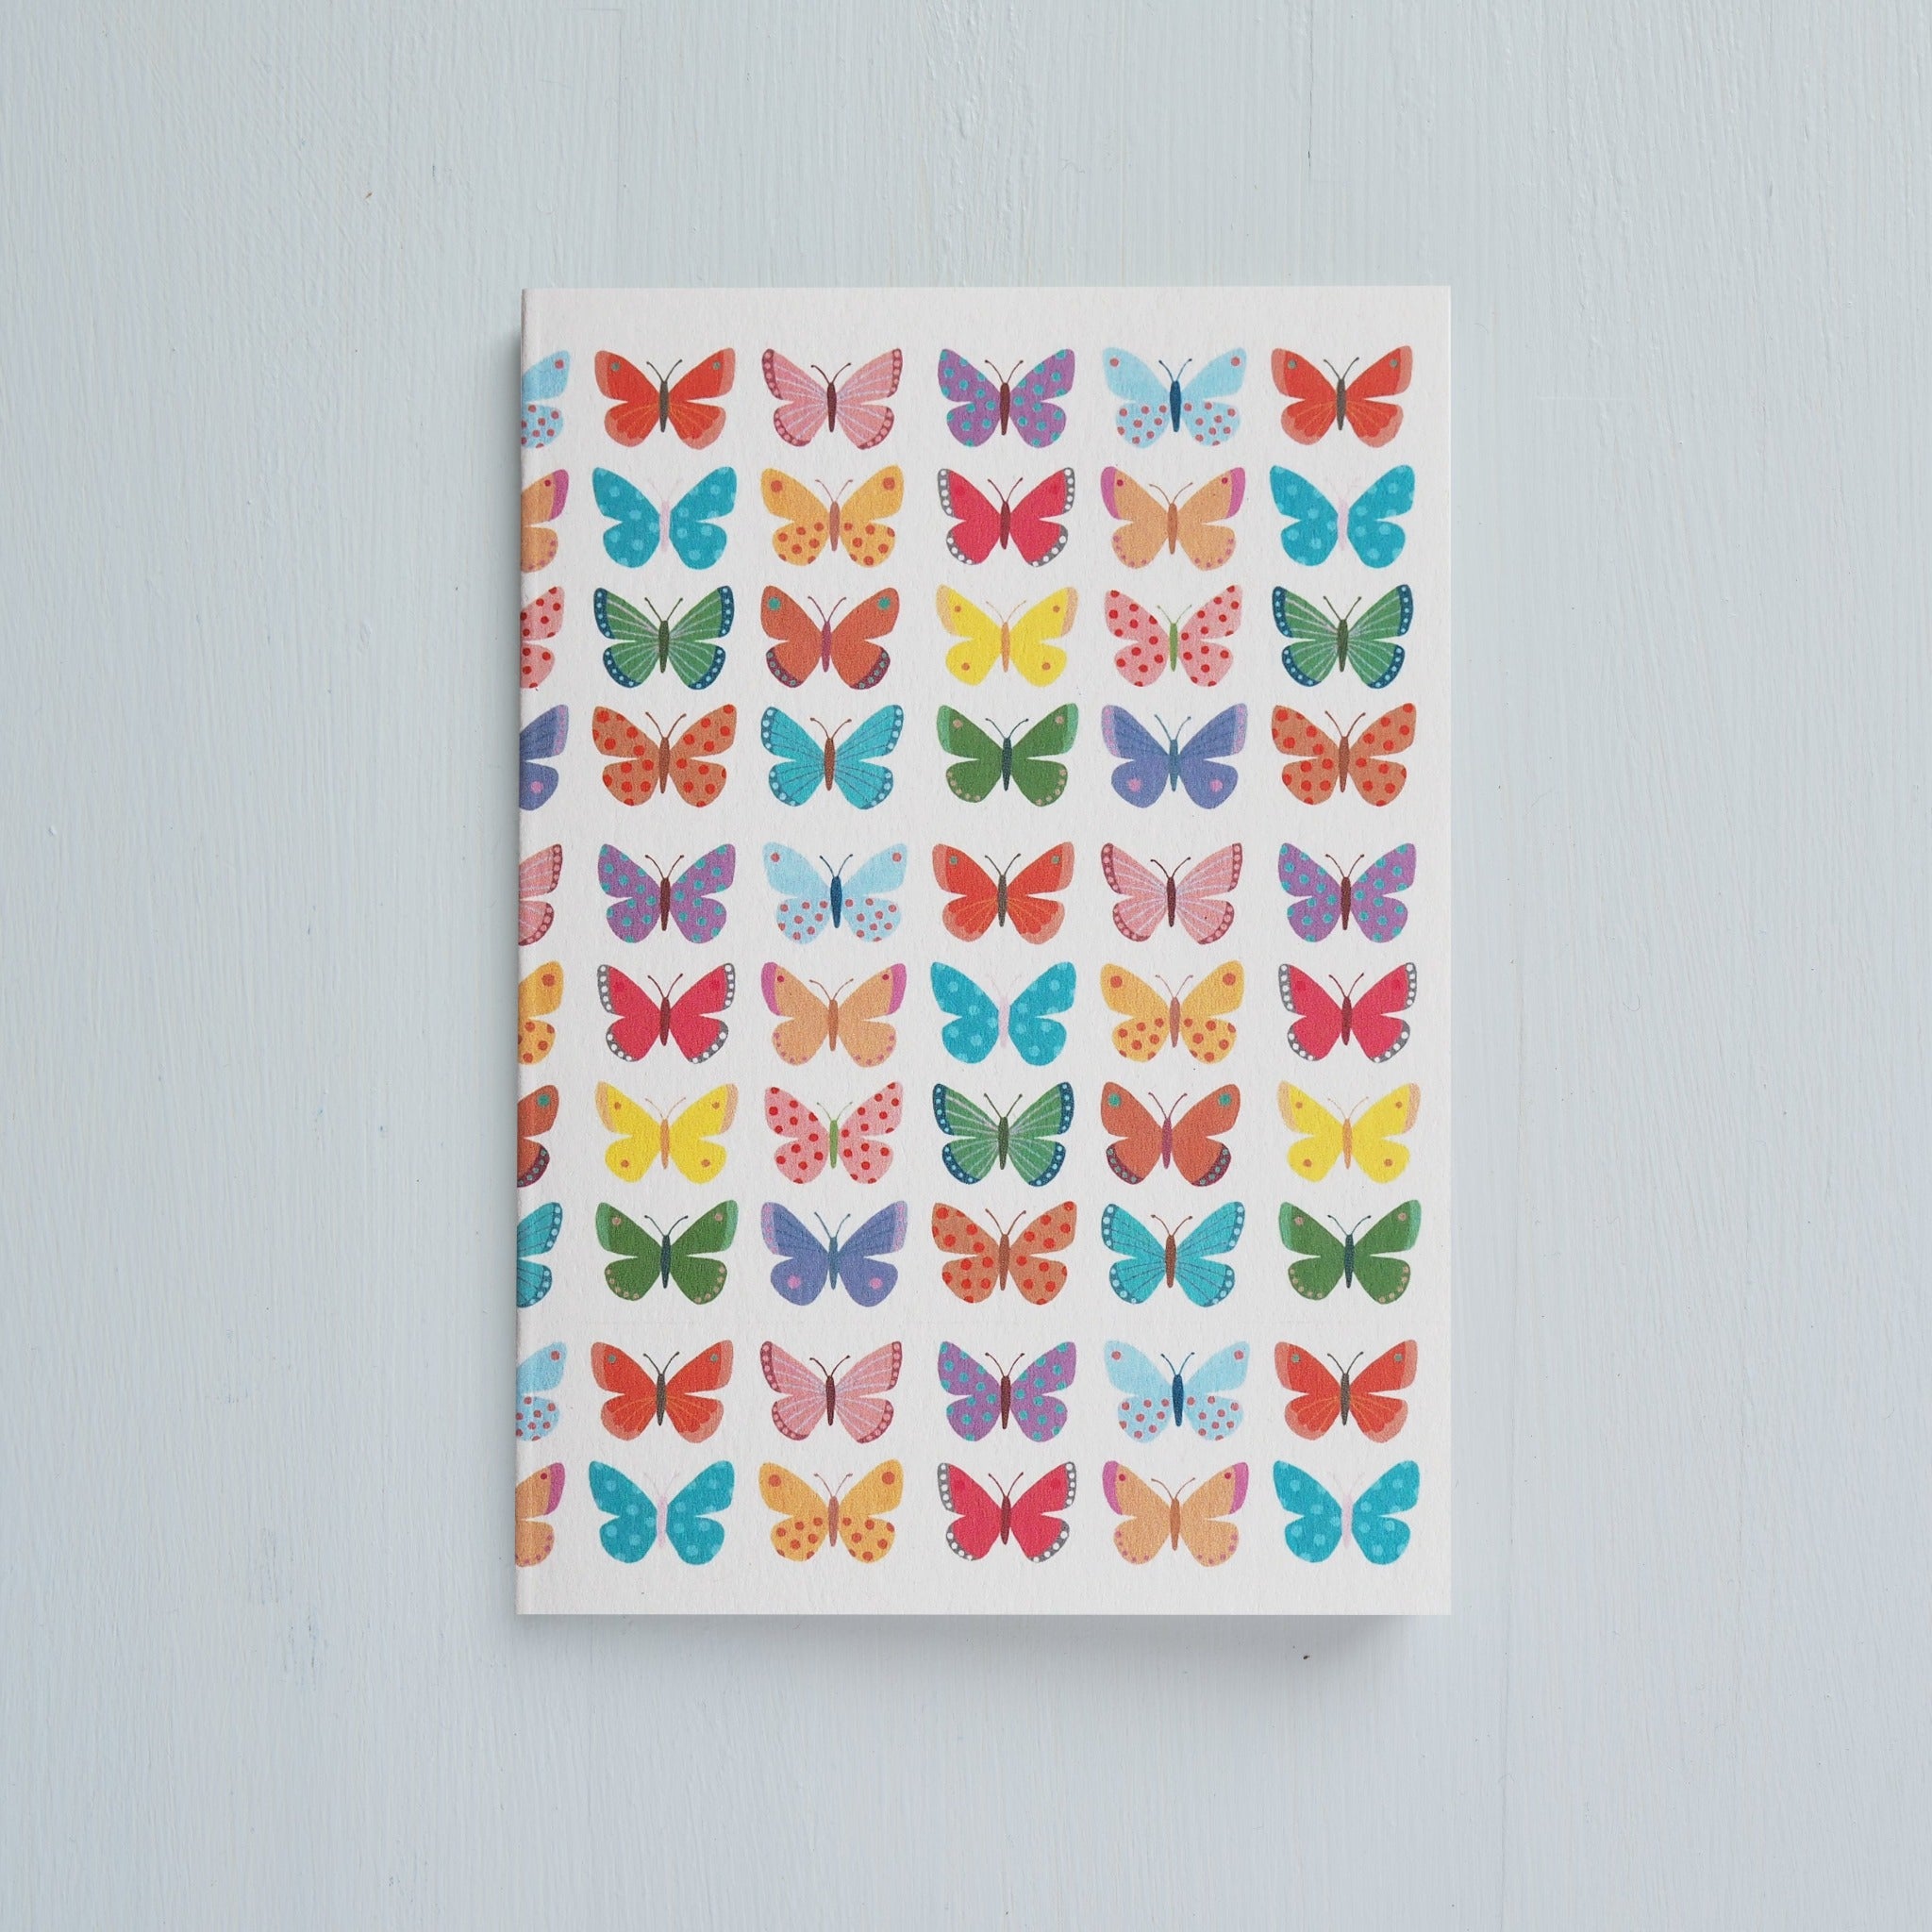 Small Butterfly Notebook by Mary Kilvert